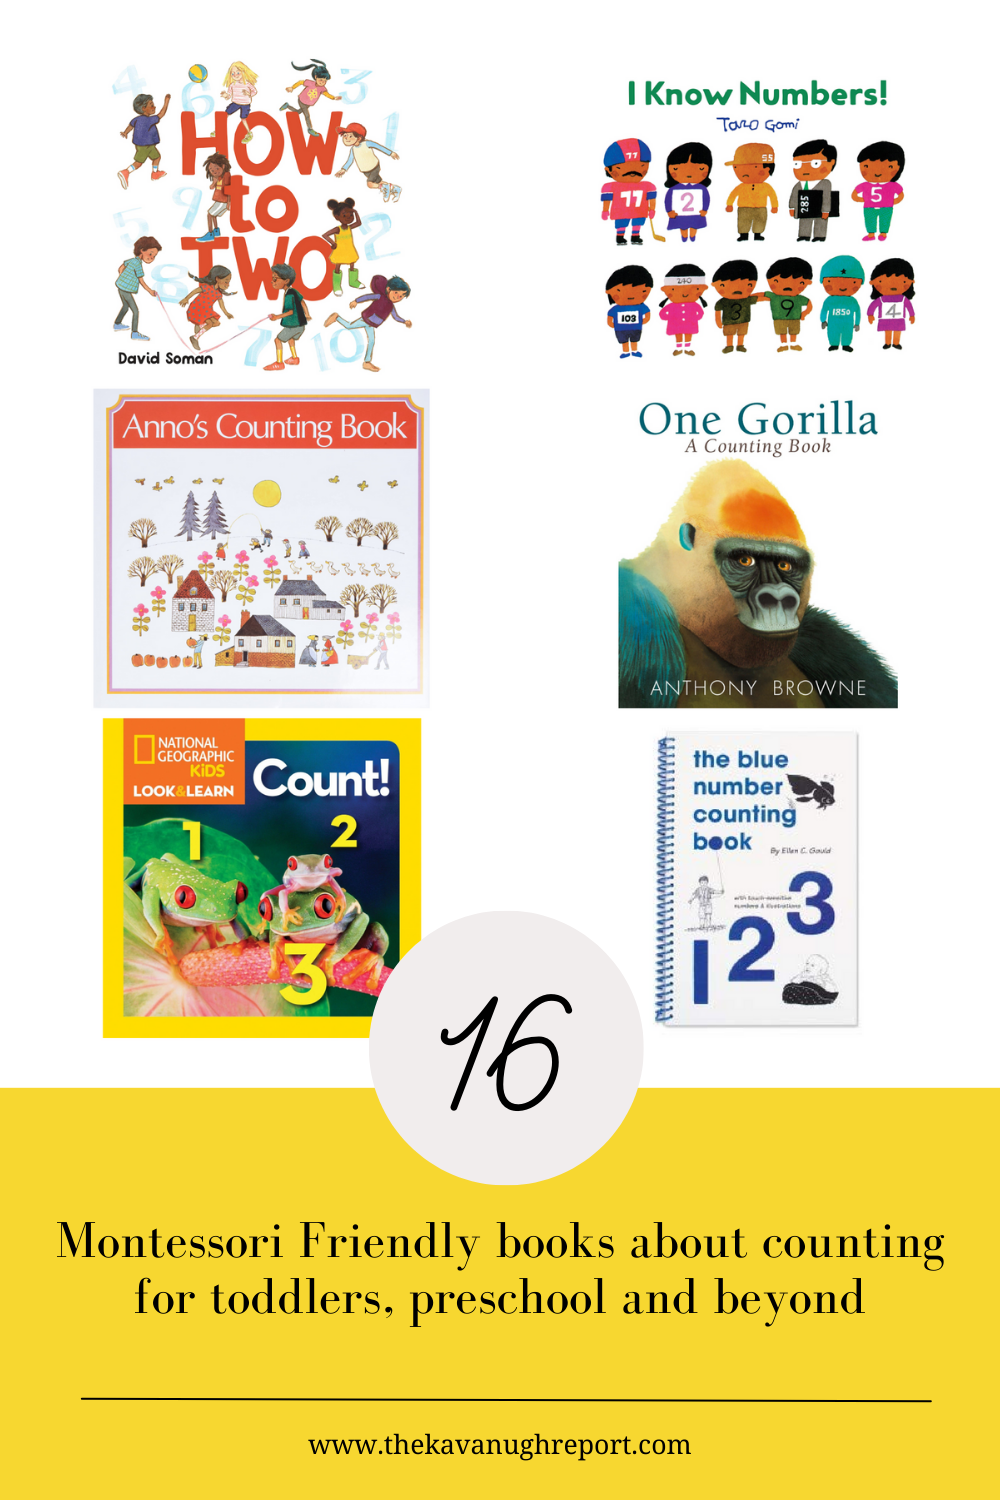 Counting books are a great way to spark imagination and fun around maths. Here are 16 Montessori friendly counting books for toddlers, preschoolers, and elementary children. From simple counting to the history of numbers, these books help make math fun and real.